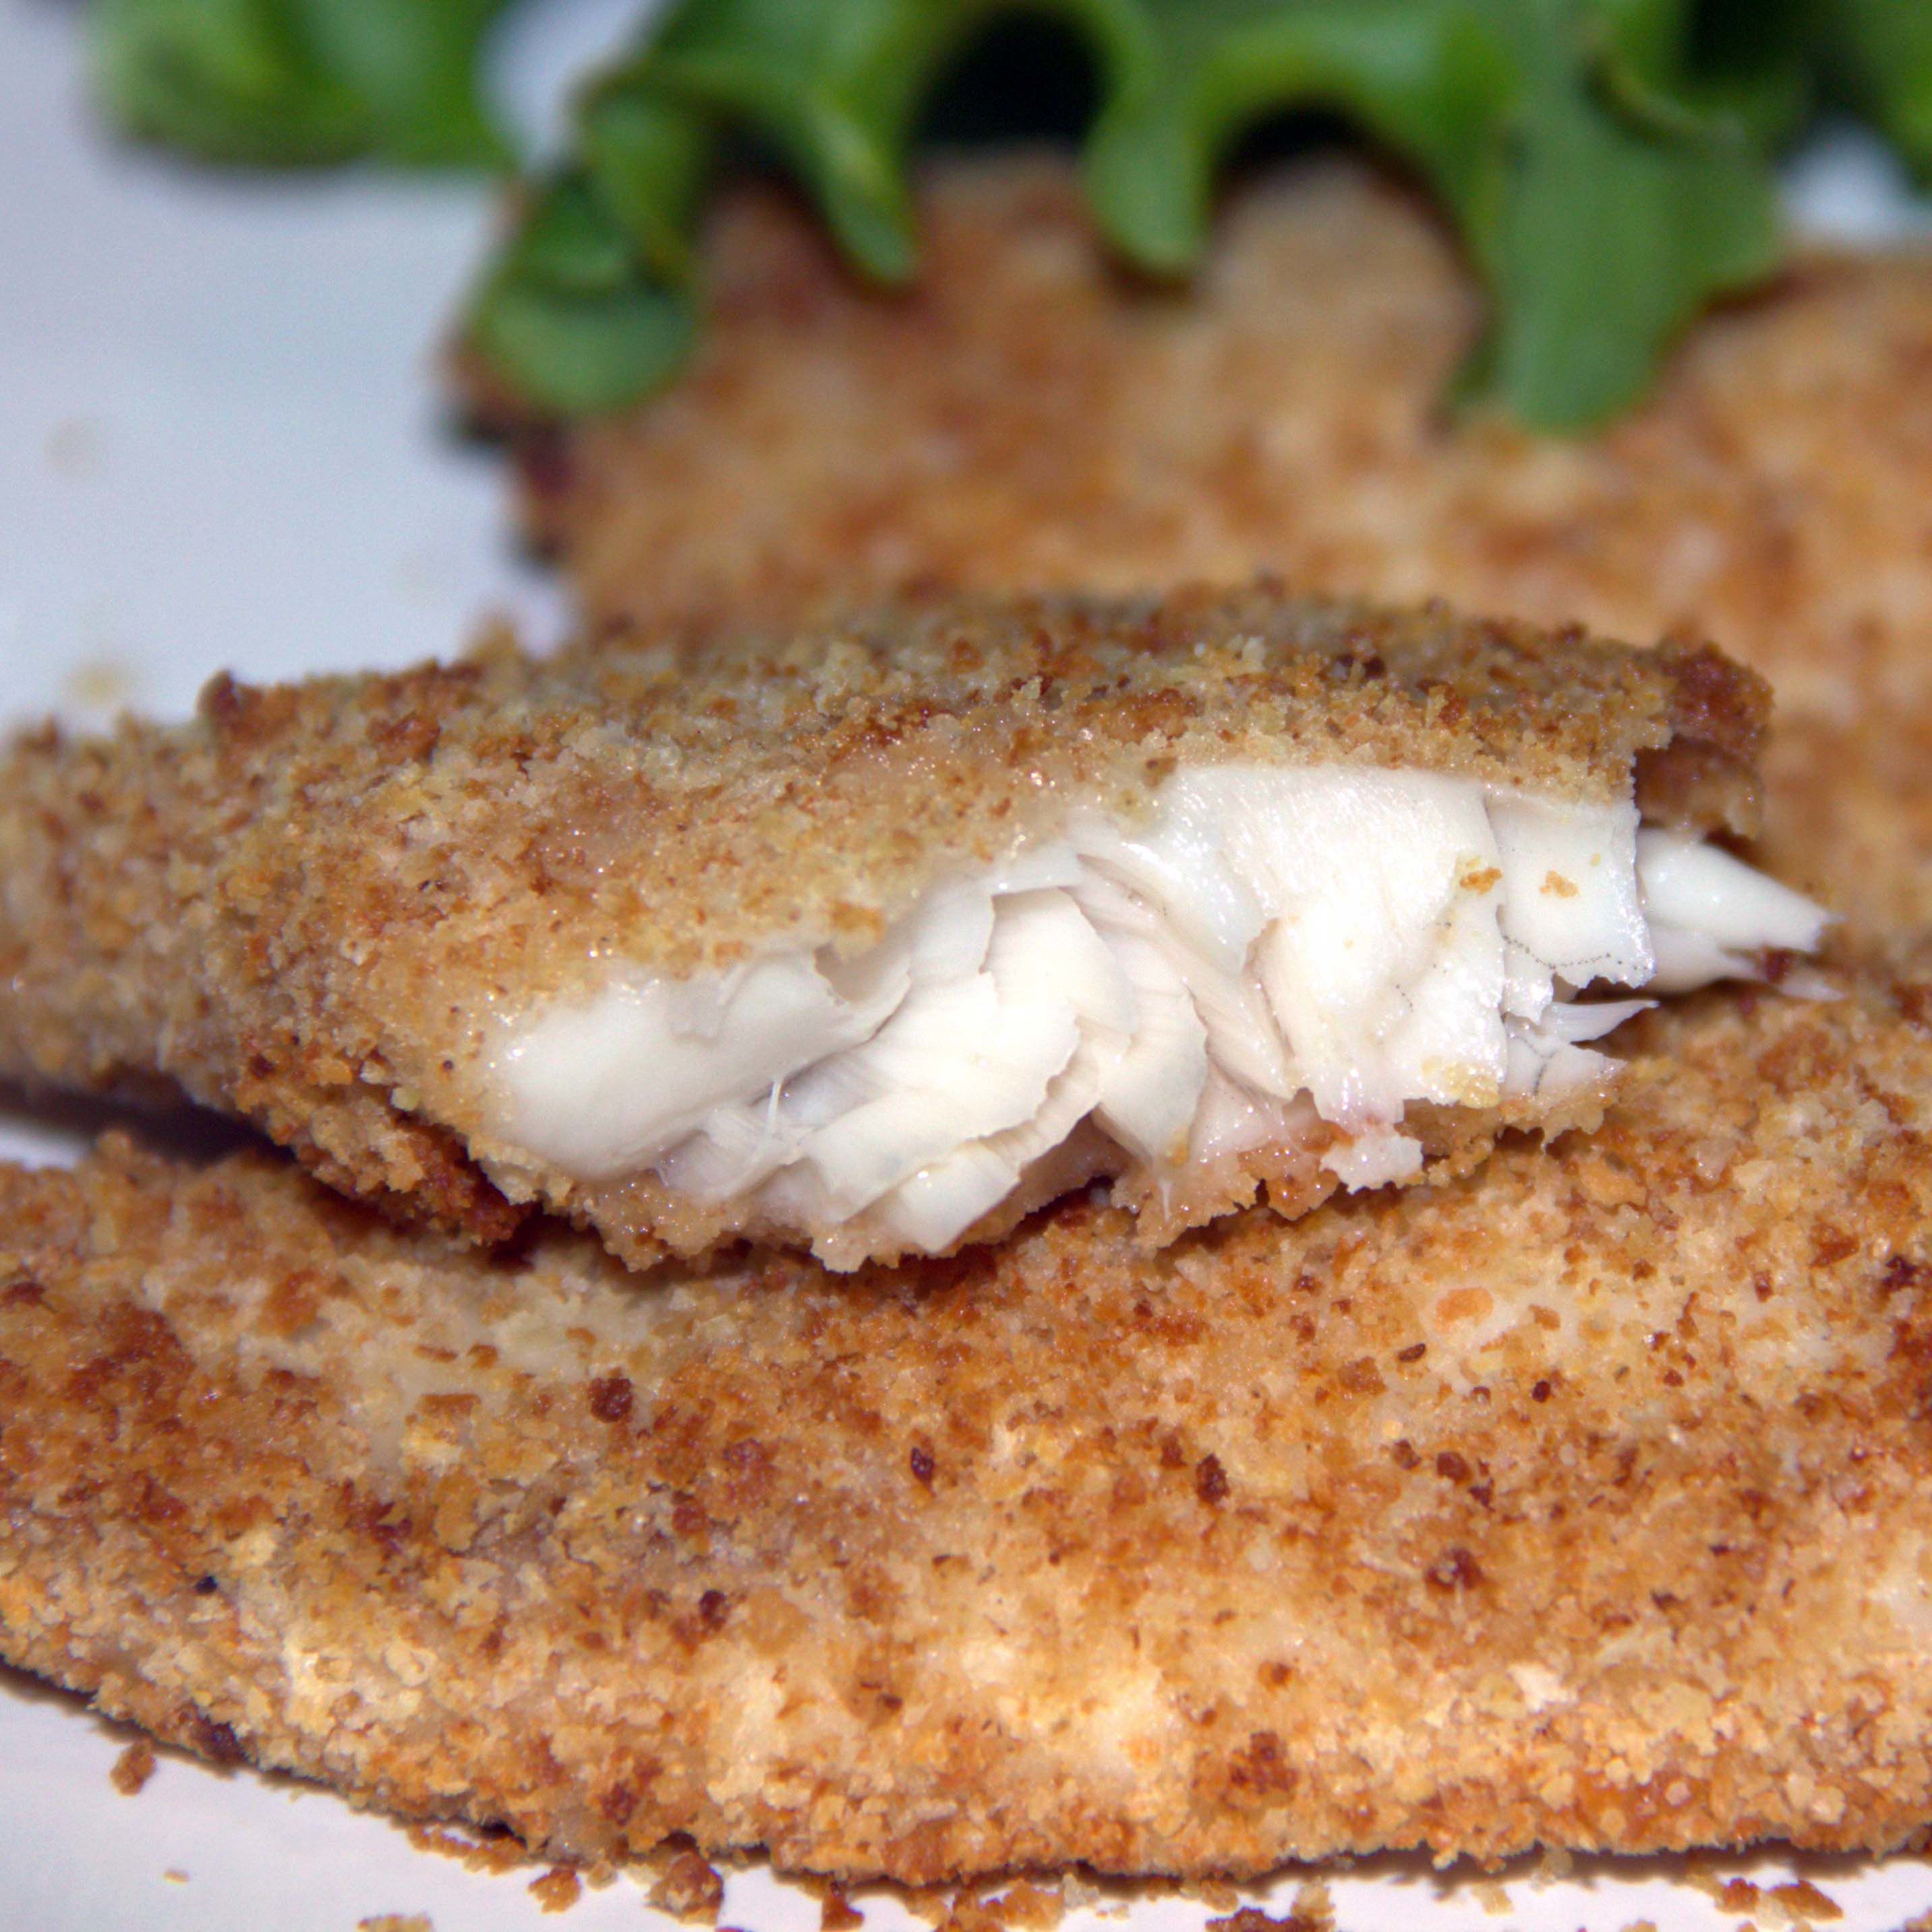 "Crumbed fish is one of my favorite fried items, and this air-fried version of the recipe gives me great flavor without the fat," says Launa.
                          